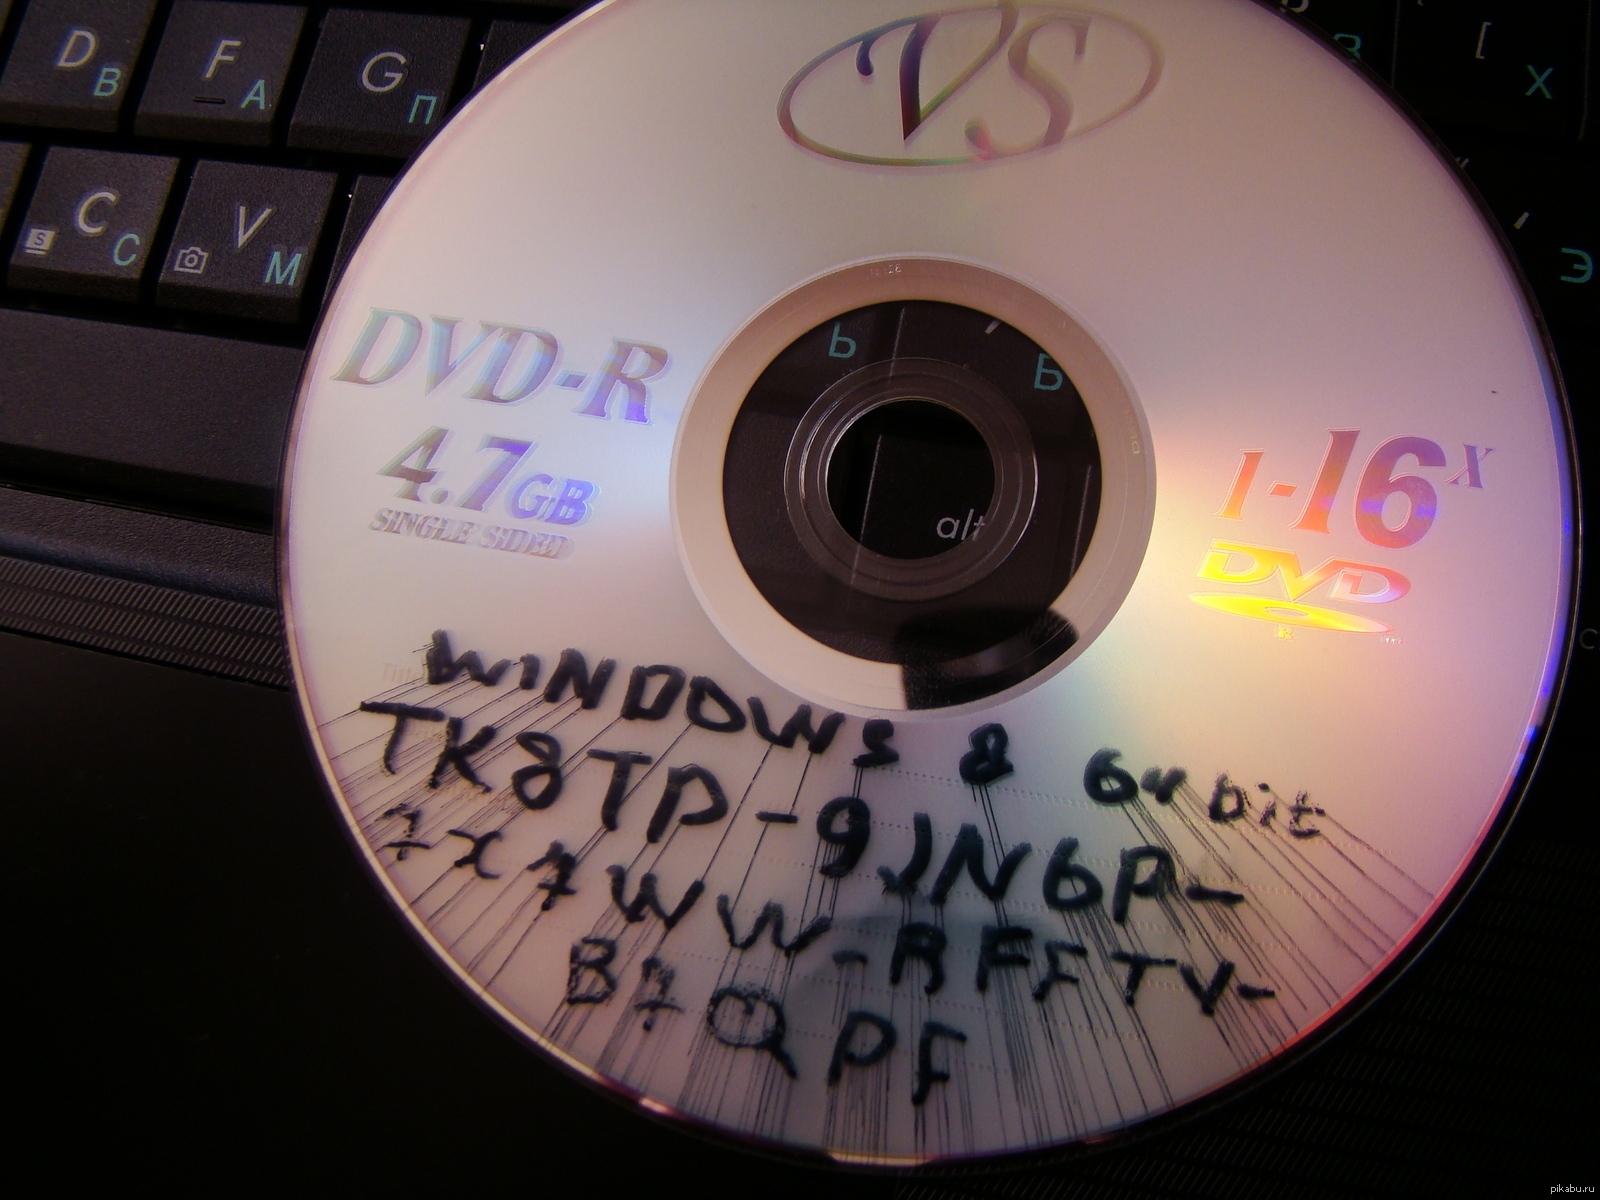 Type the cd key displayed on the half life cd case фото 93